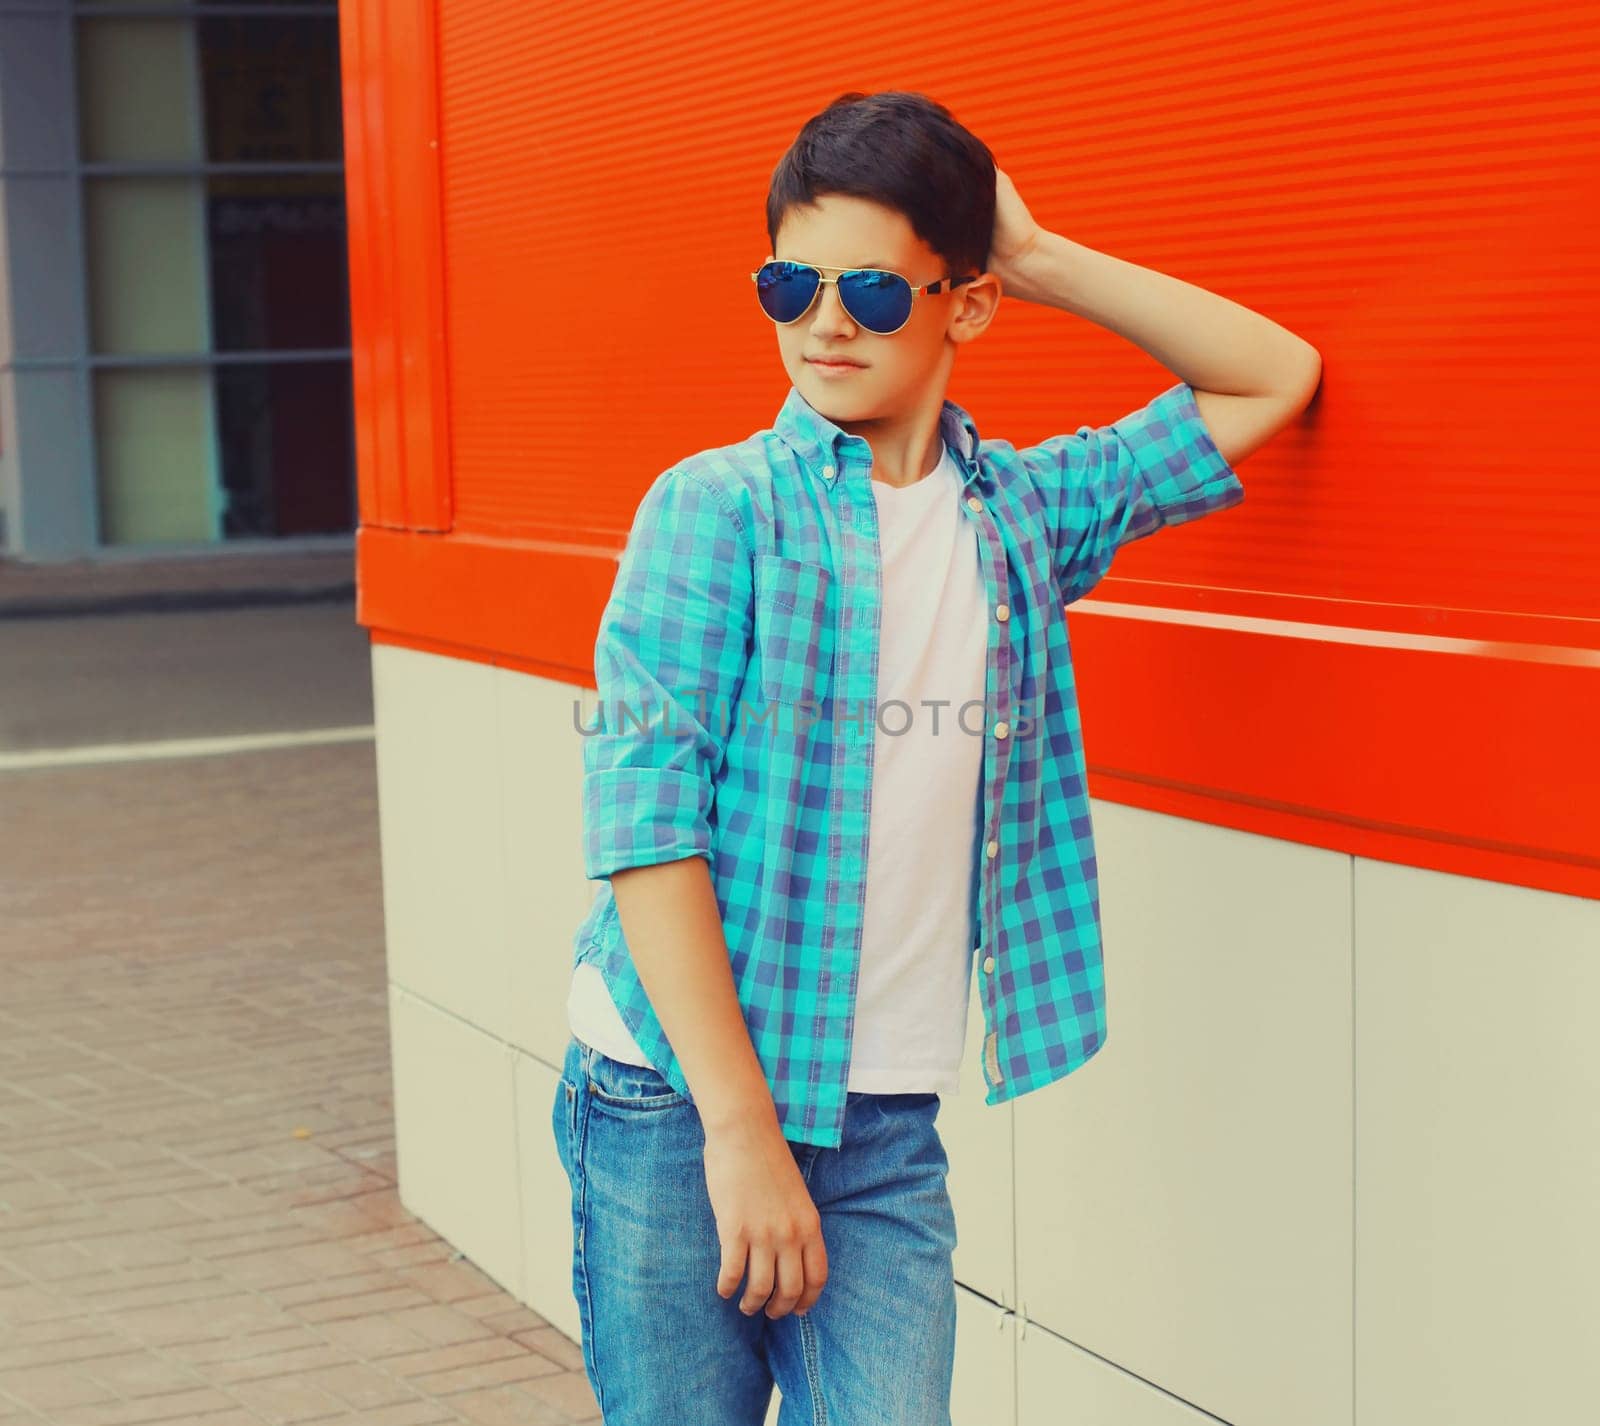 Teenager boy posing wearing sunglasses and shirt on the city street